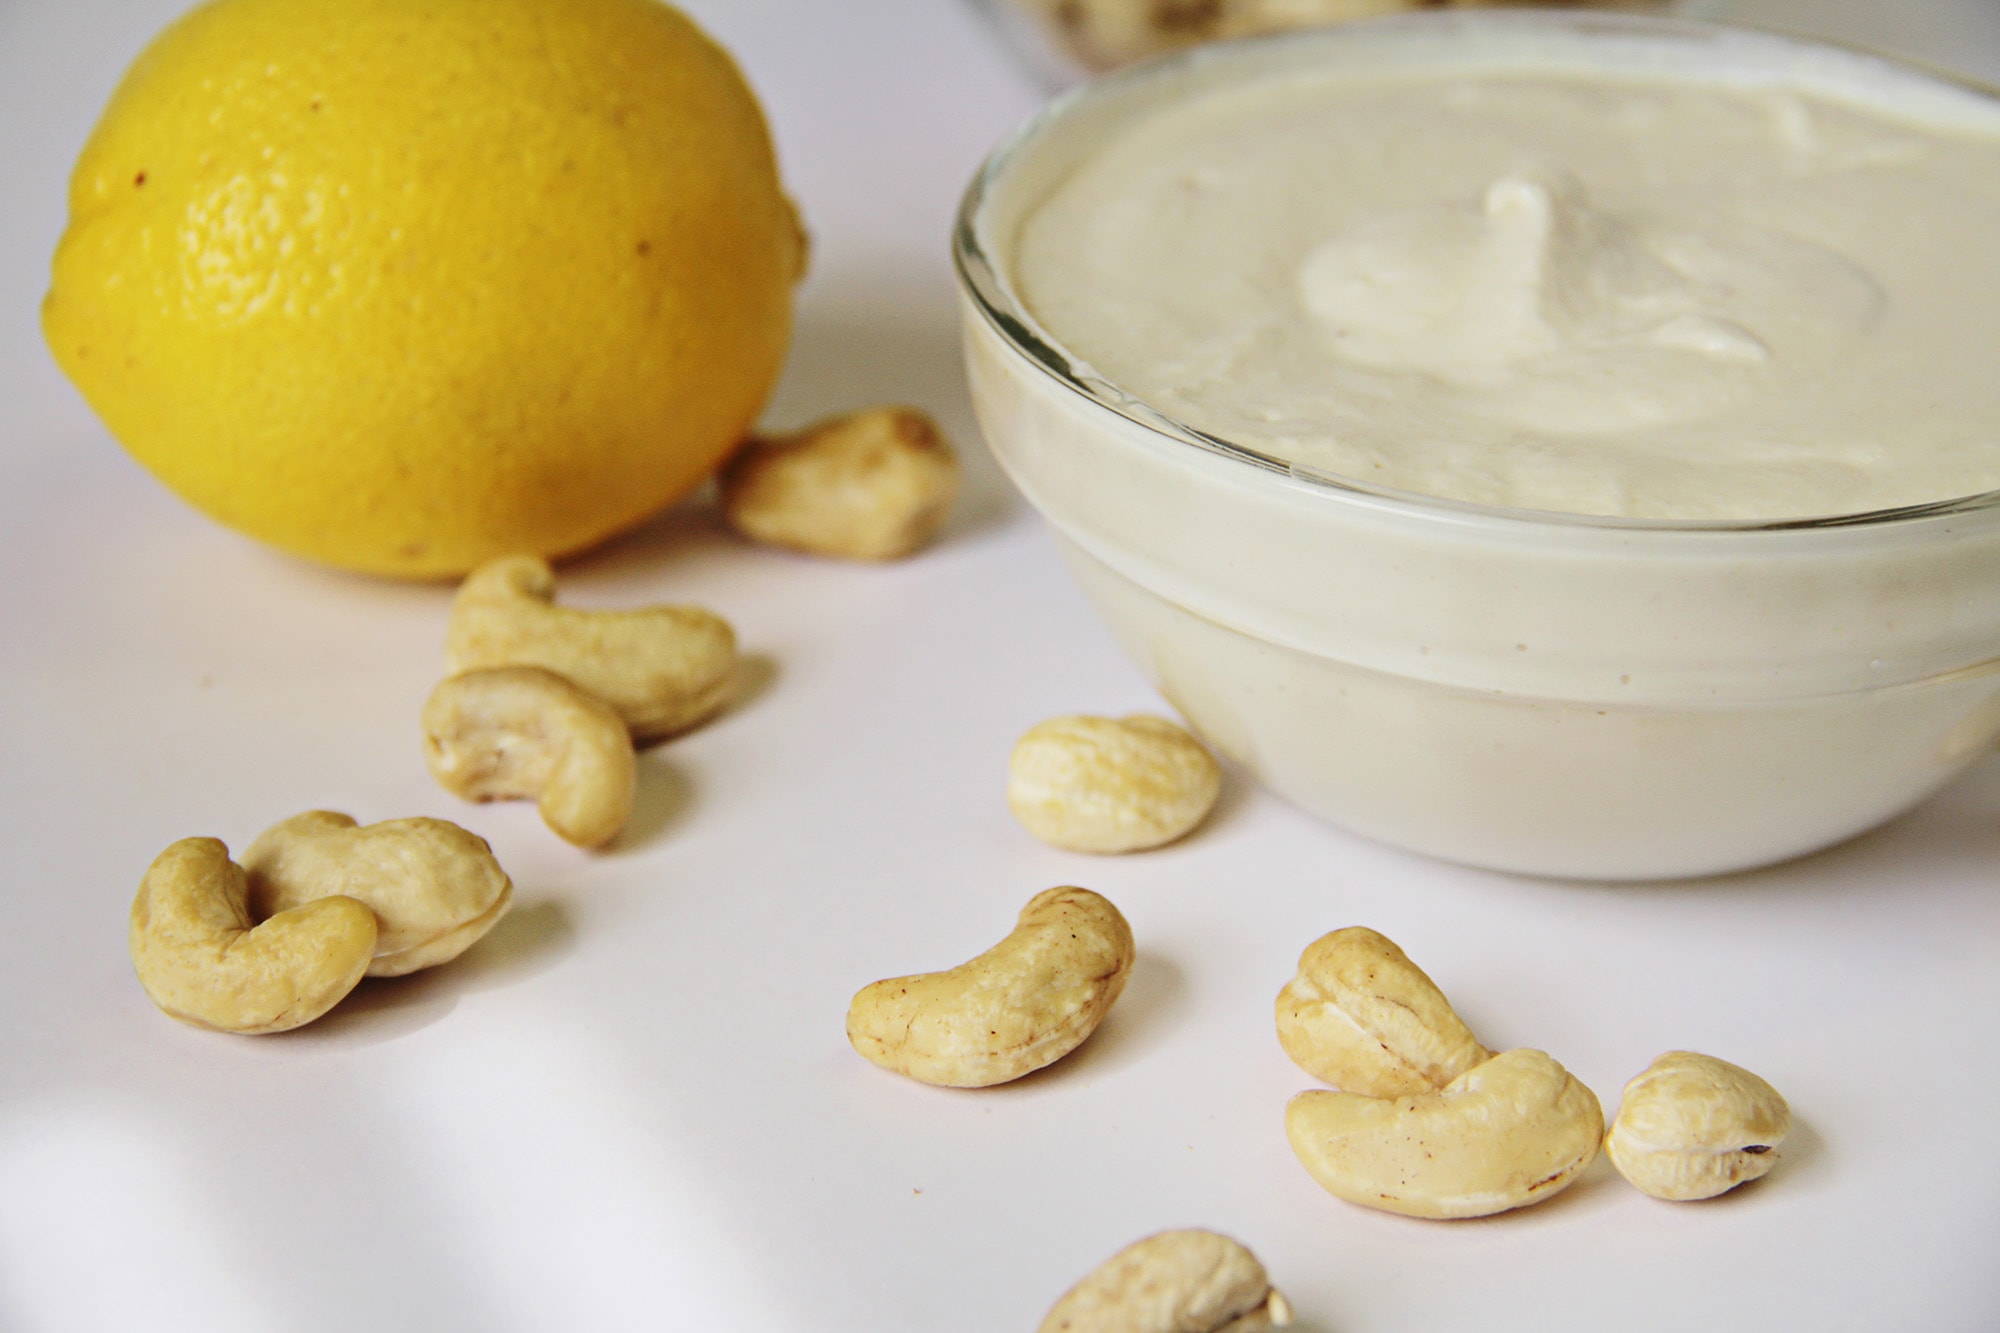 Vegan sour cream made with cashews and lemon in a small bowl.